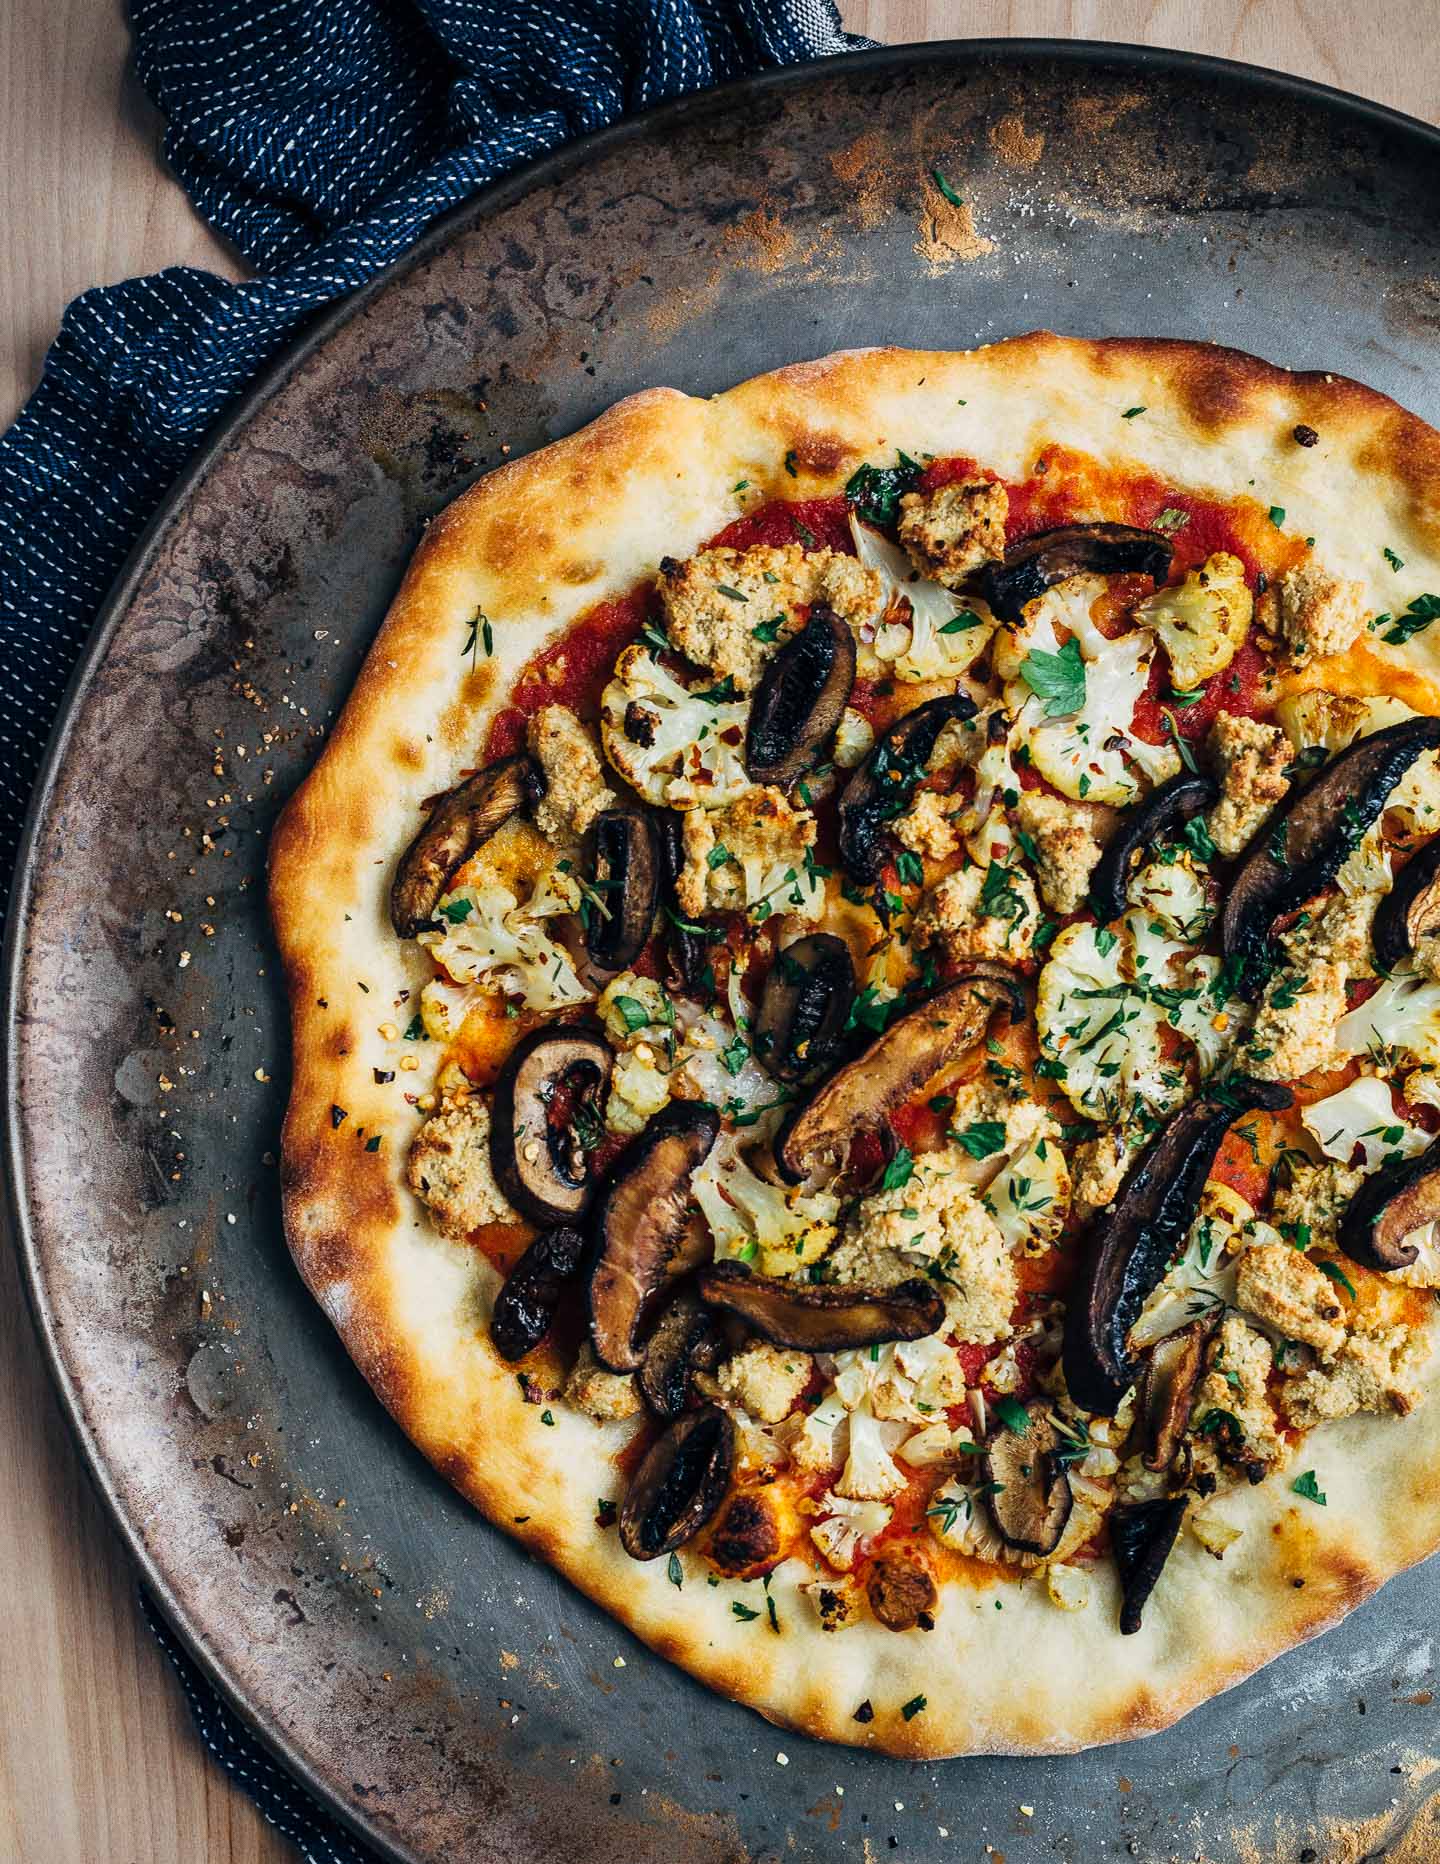 A super flavorful vegan pizza recipe featuring roasted cauliflower and mushrooms, fresh herbs, and a sunflower seed-nutritional yeast topping.